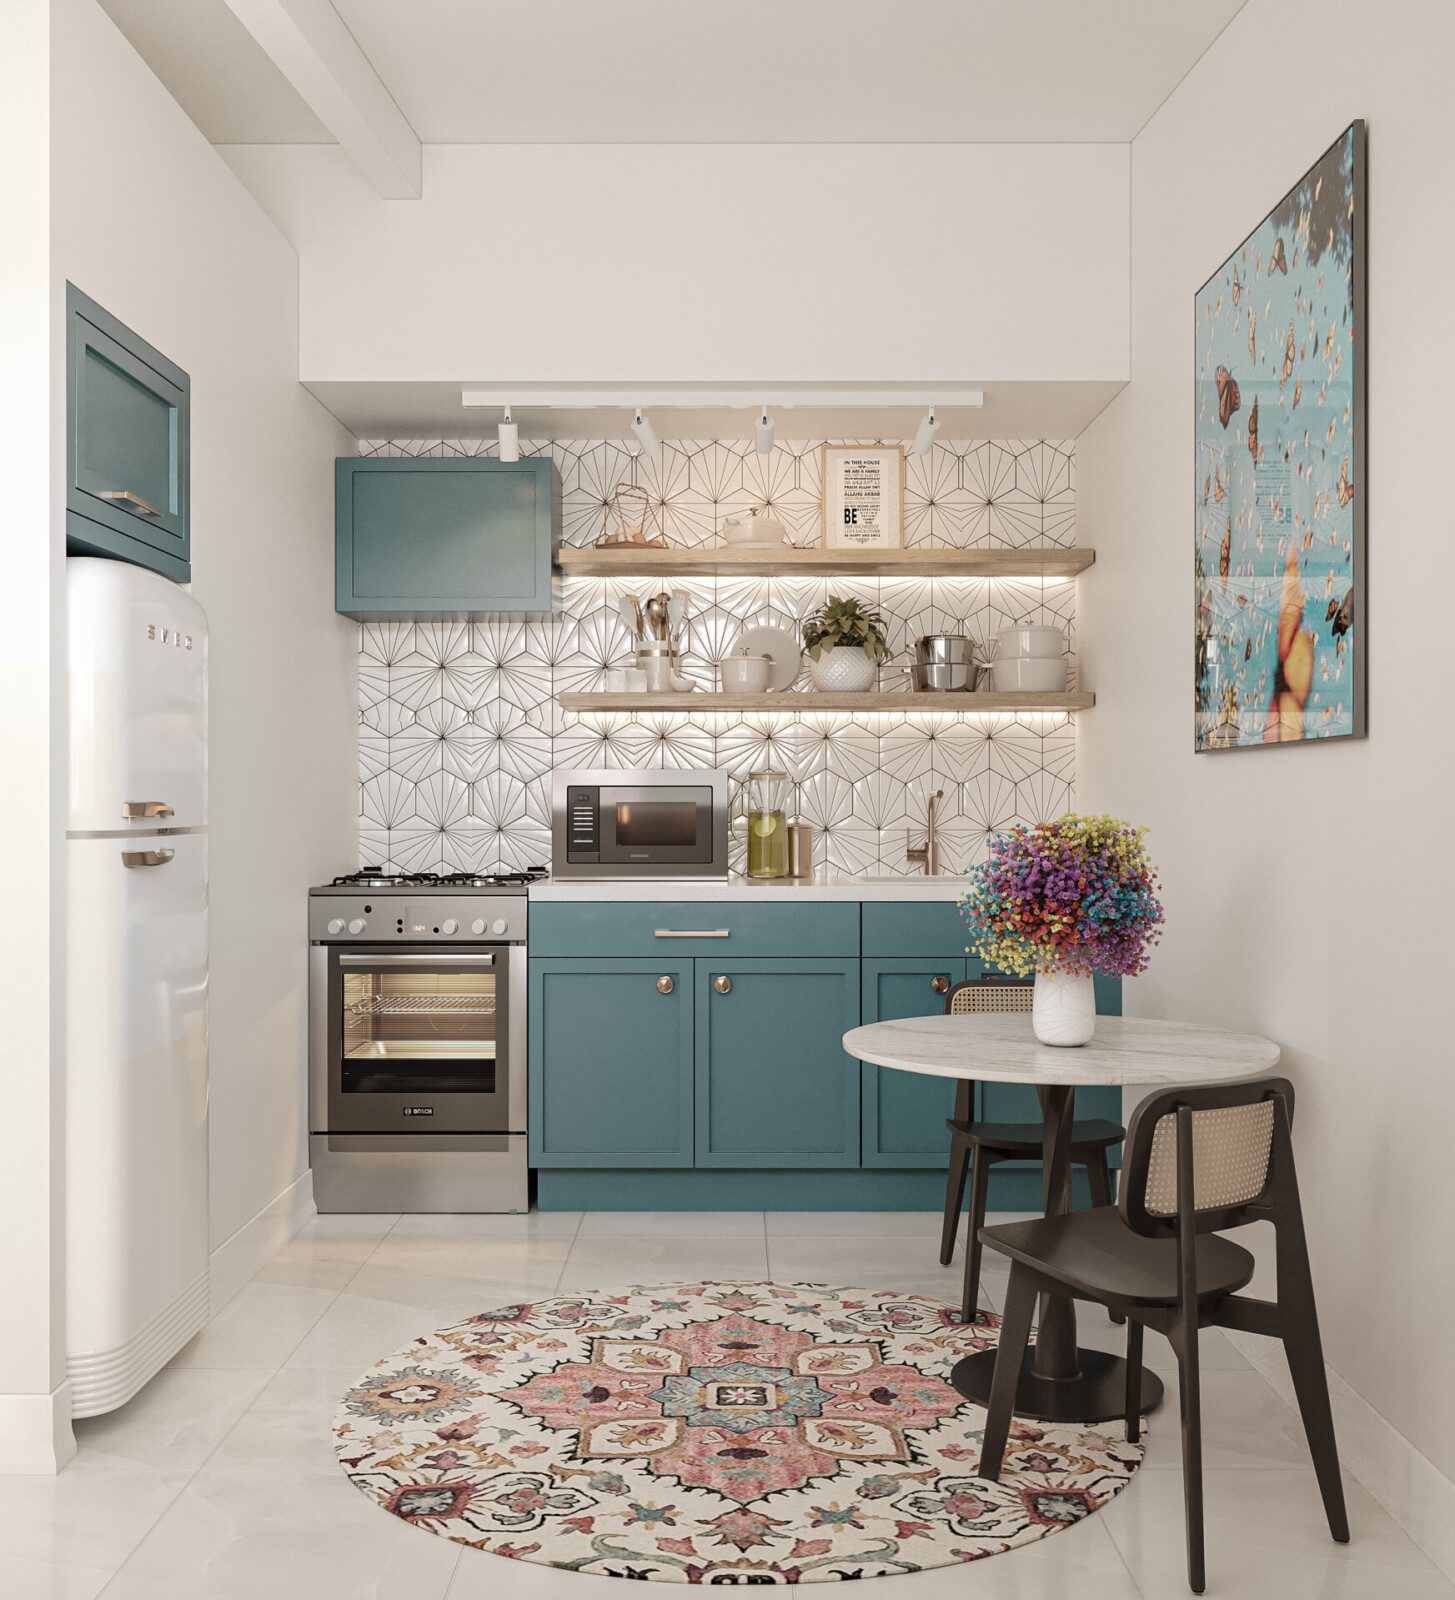 A modern kitchen with teal cabinetry, white countertops, geometric backsplash tiles, and stainless steel appliances. There's a round dining table with two chairs, a colorful area rug on the floor, and decorative items including a vase of flowers and wall art.